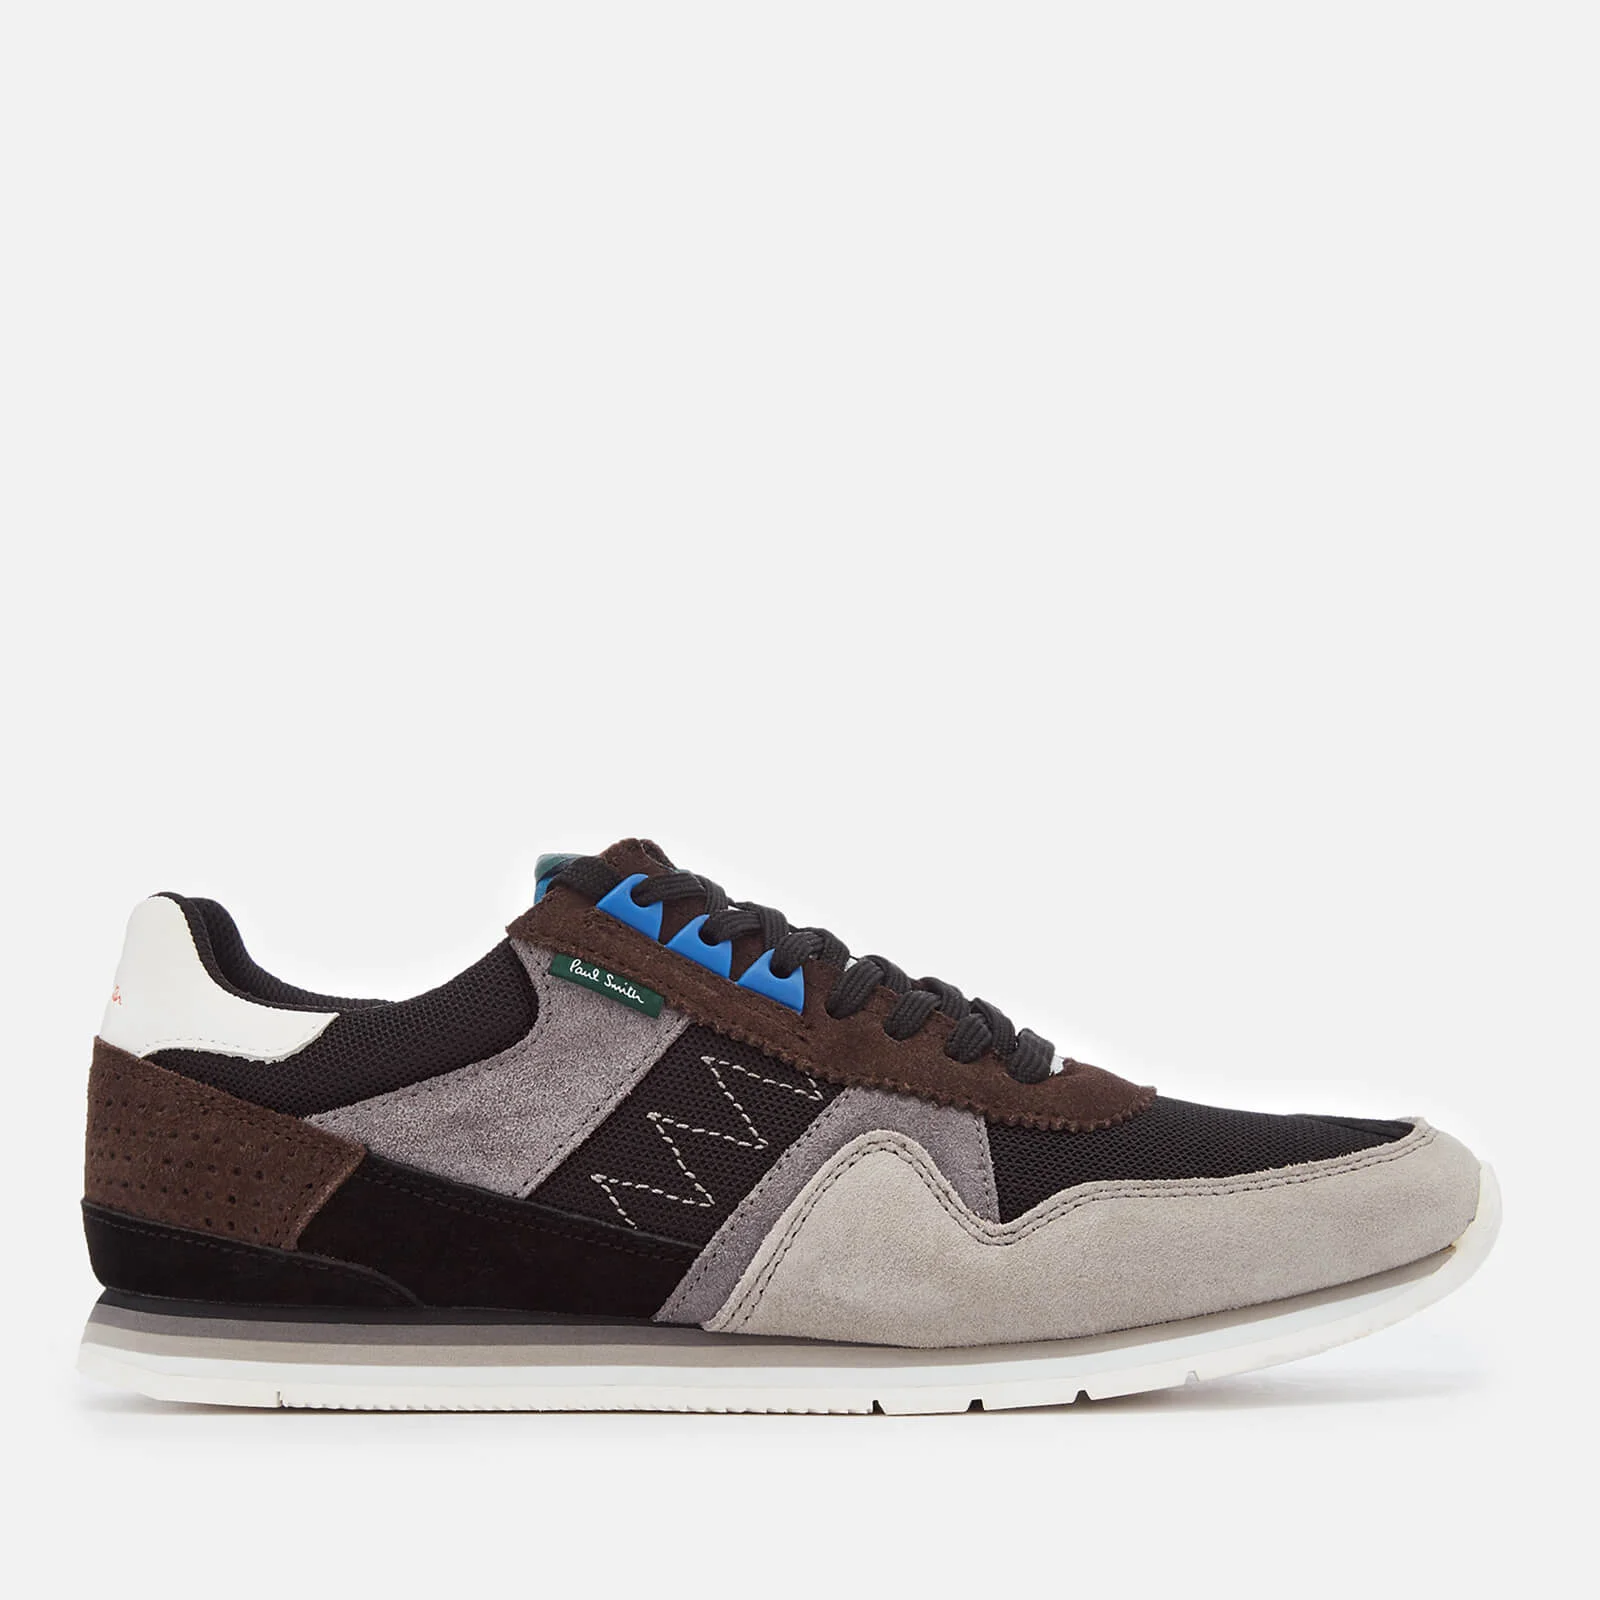 PS Paul Smith Men's Vinny Runner Style Trainers - Anthracite Image 1